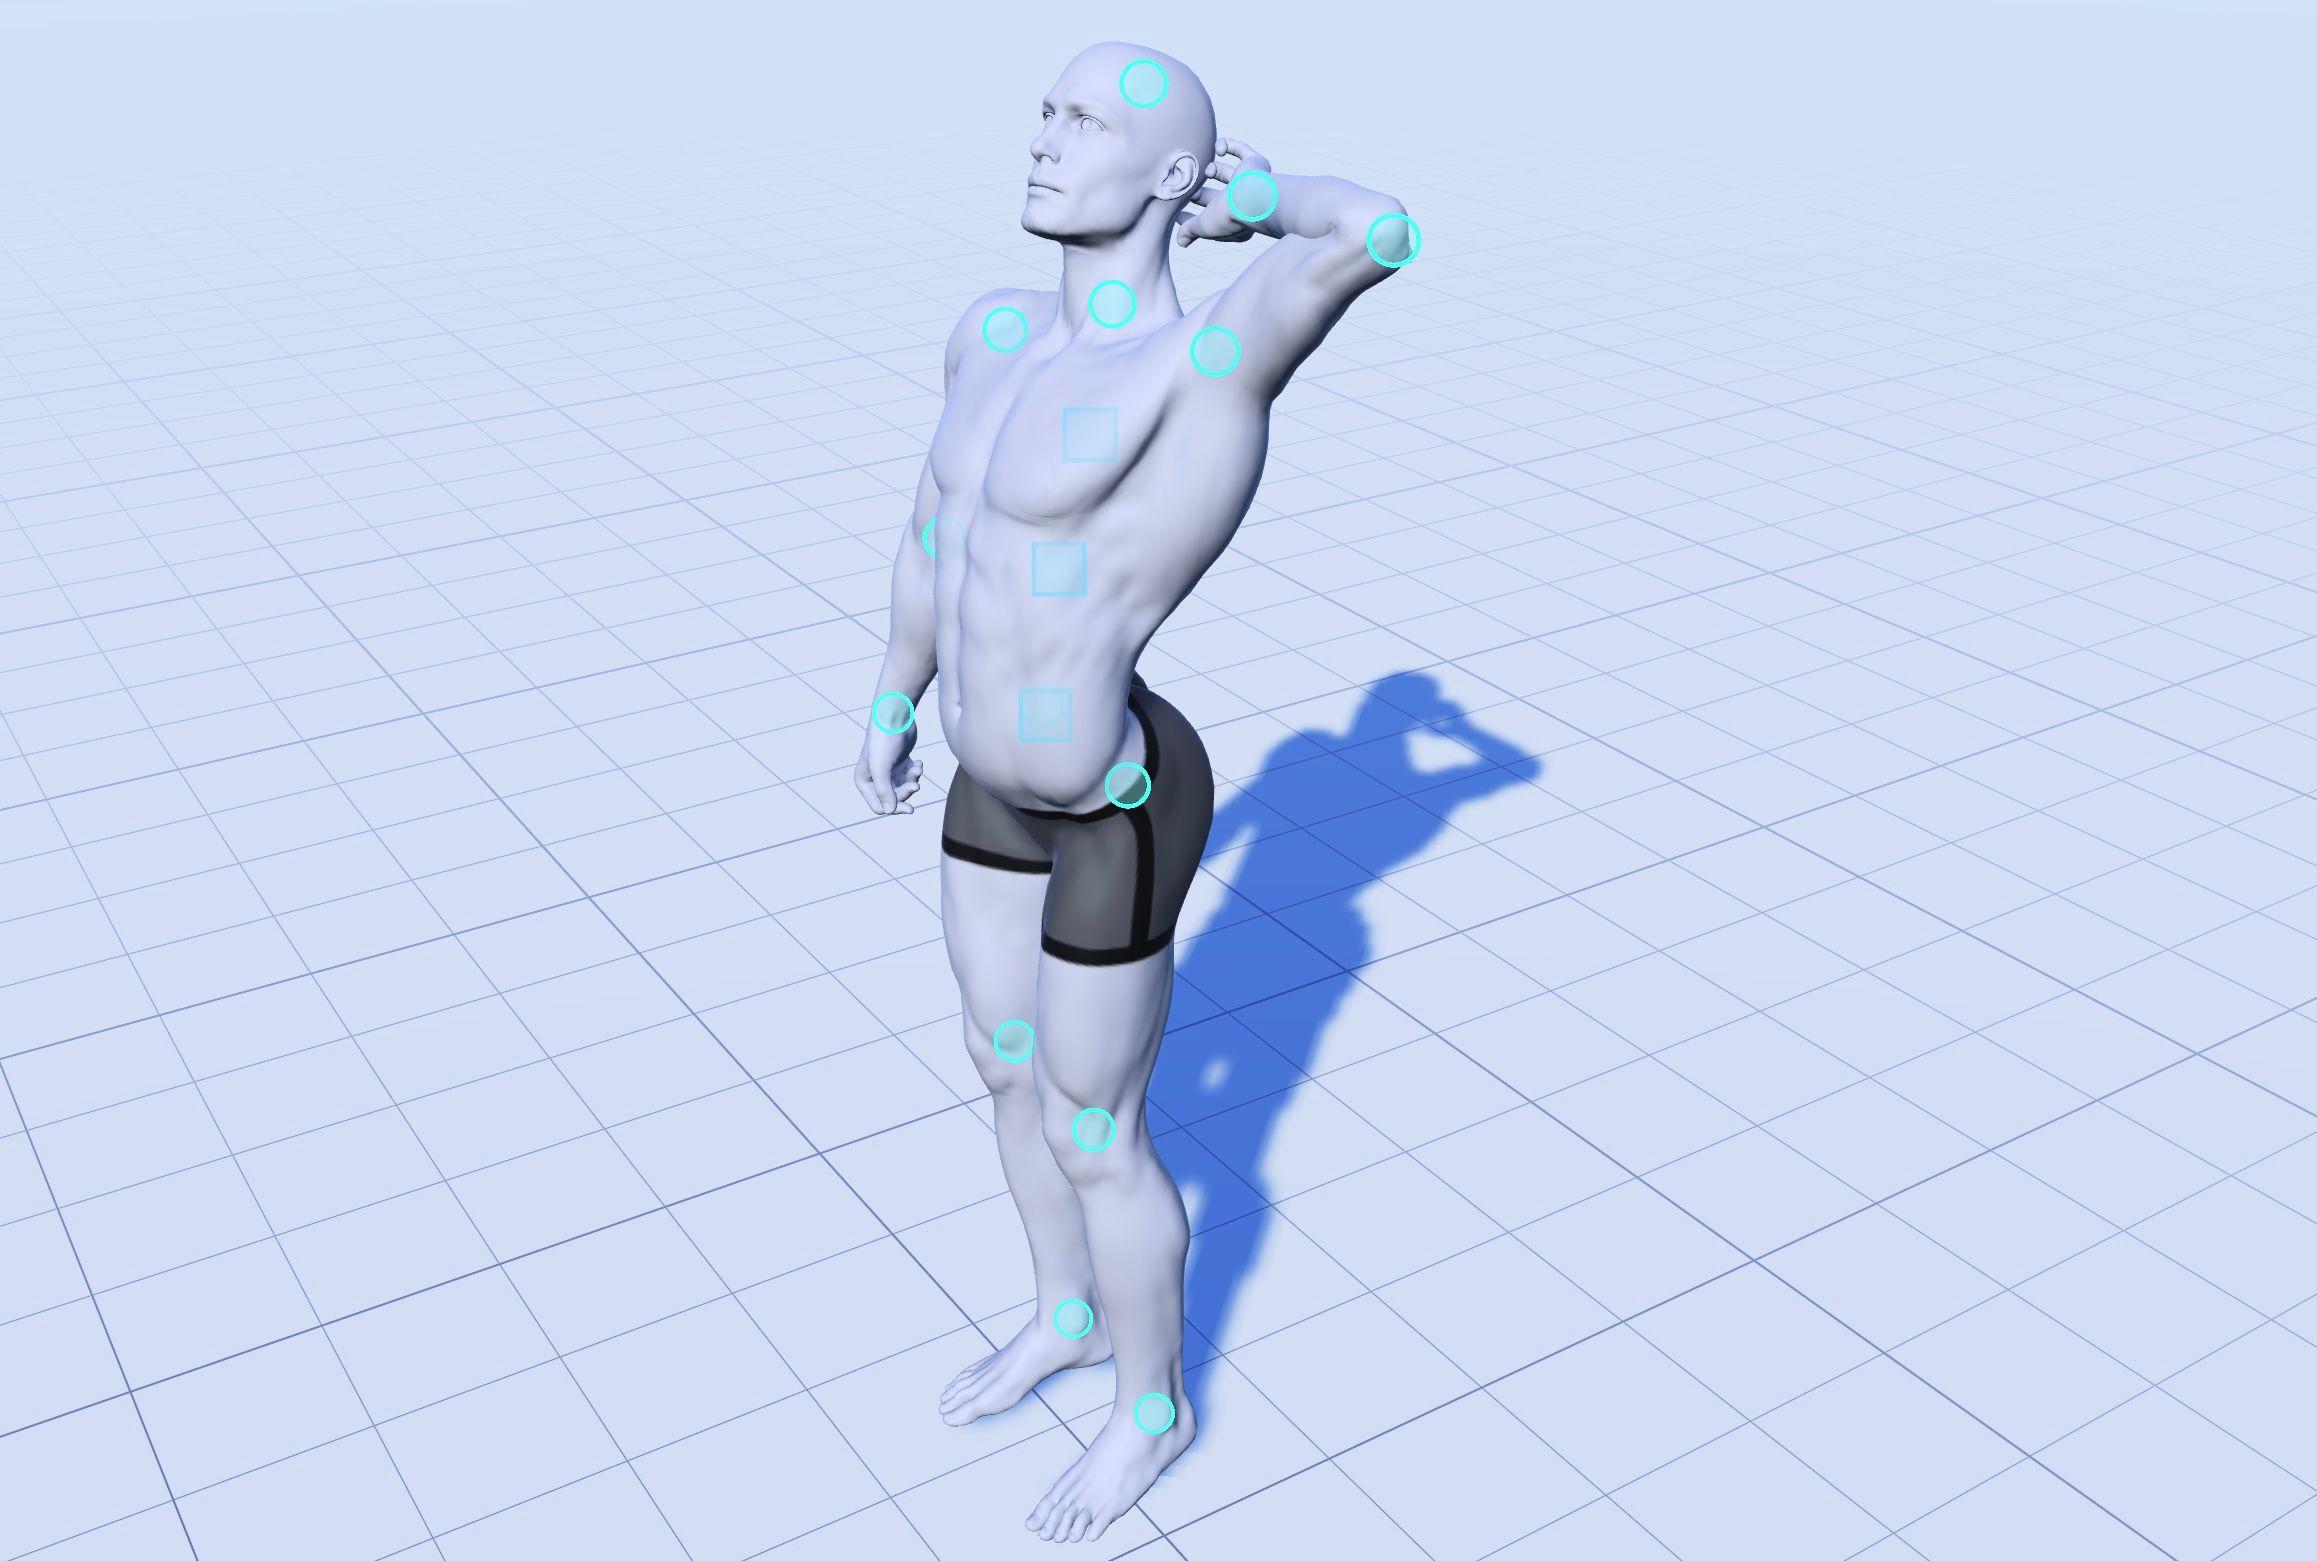 3D model of man tilting his head and spine backwards with left hand behind head